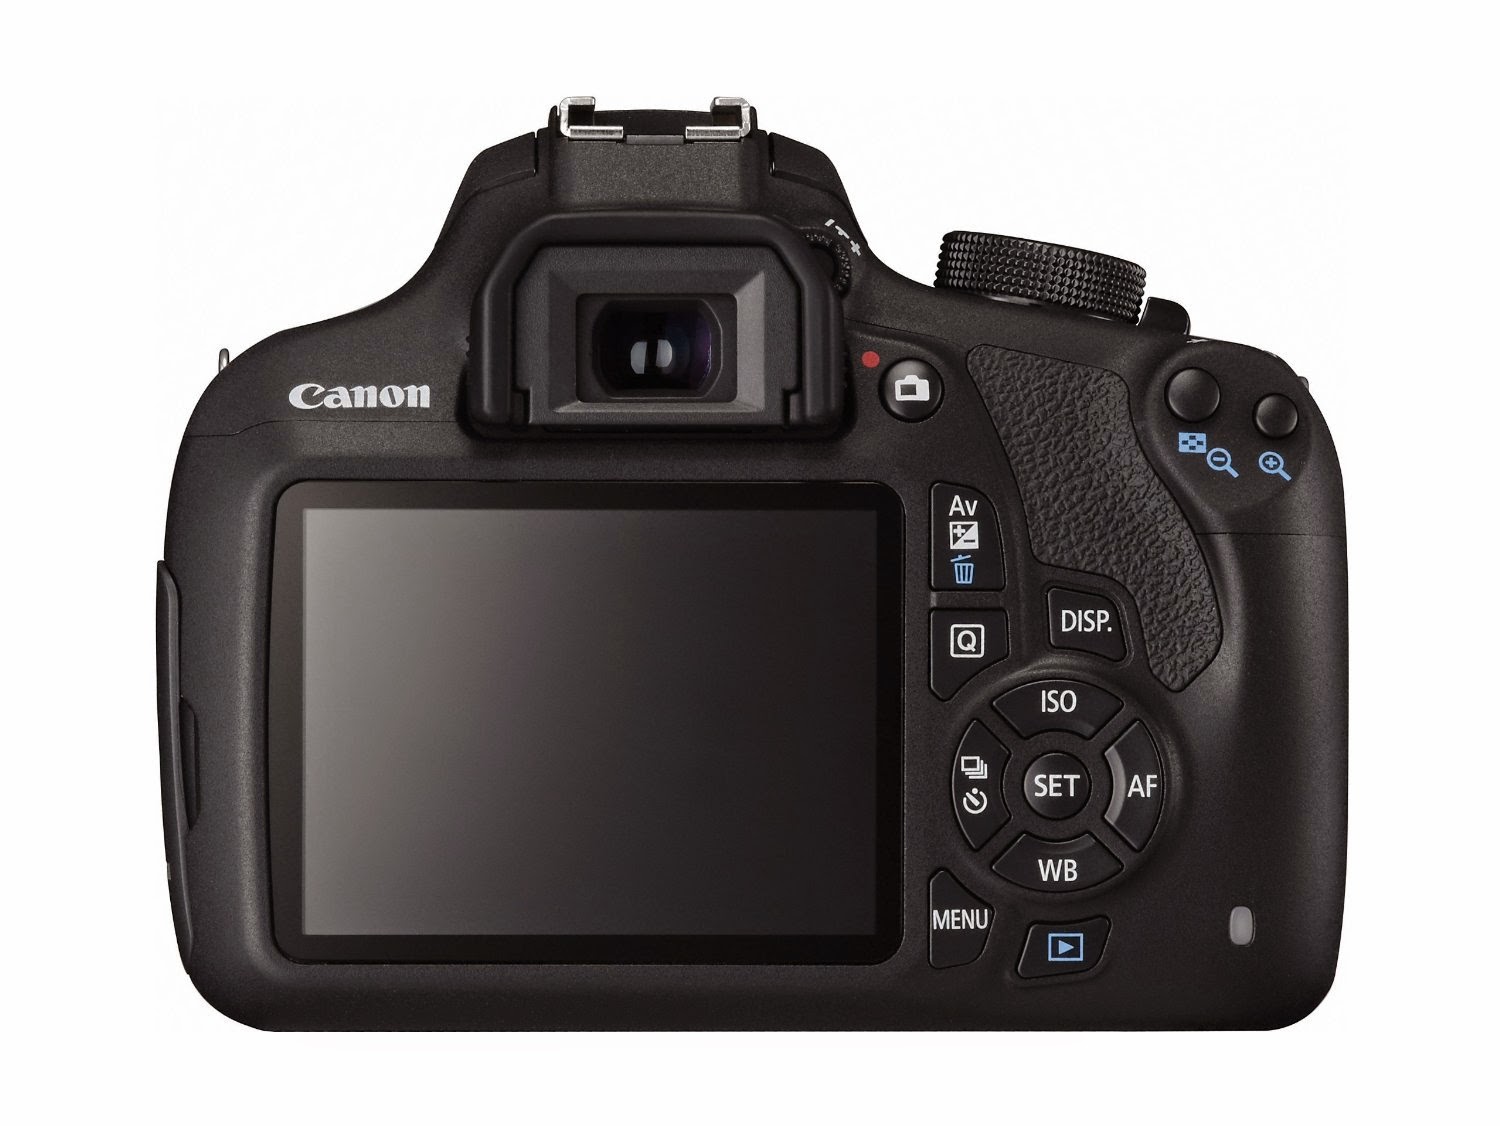 Canon EOS Rebel T5 DLSR, rear view, picture, image, review features & specifications